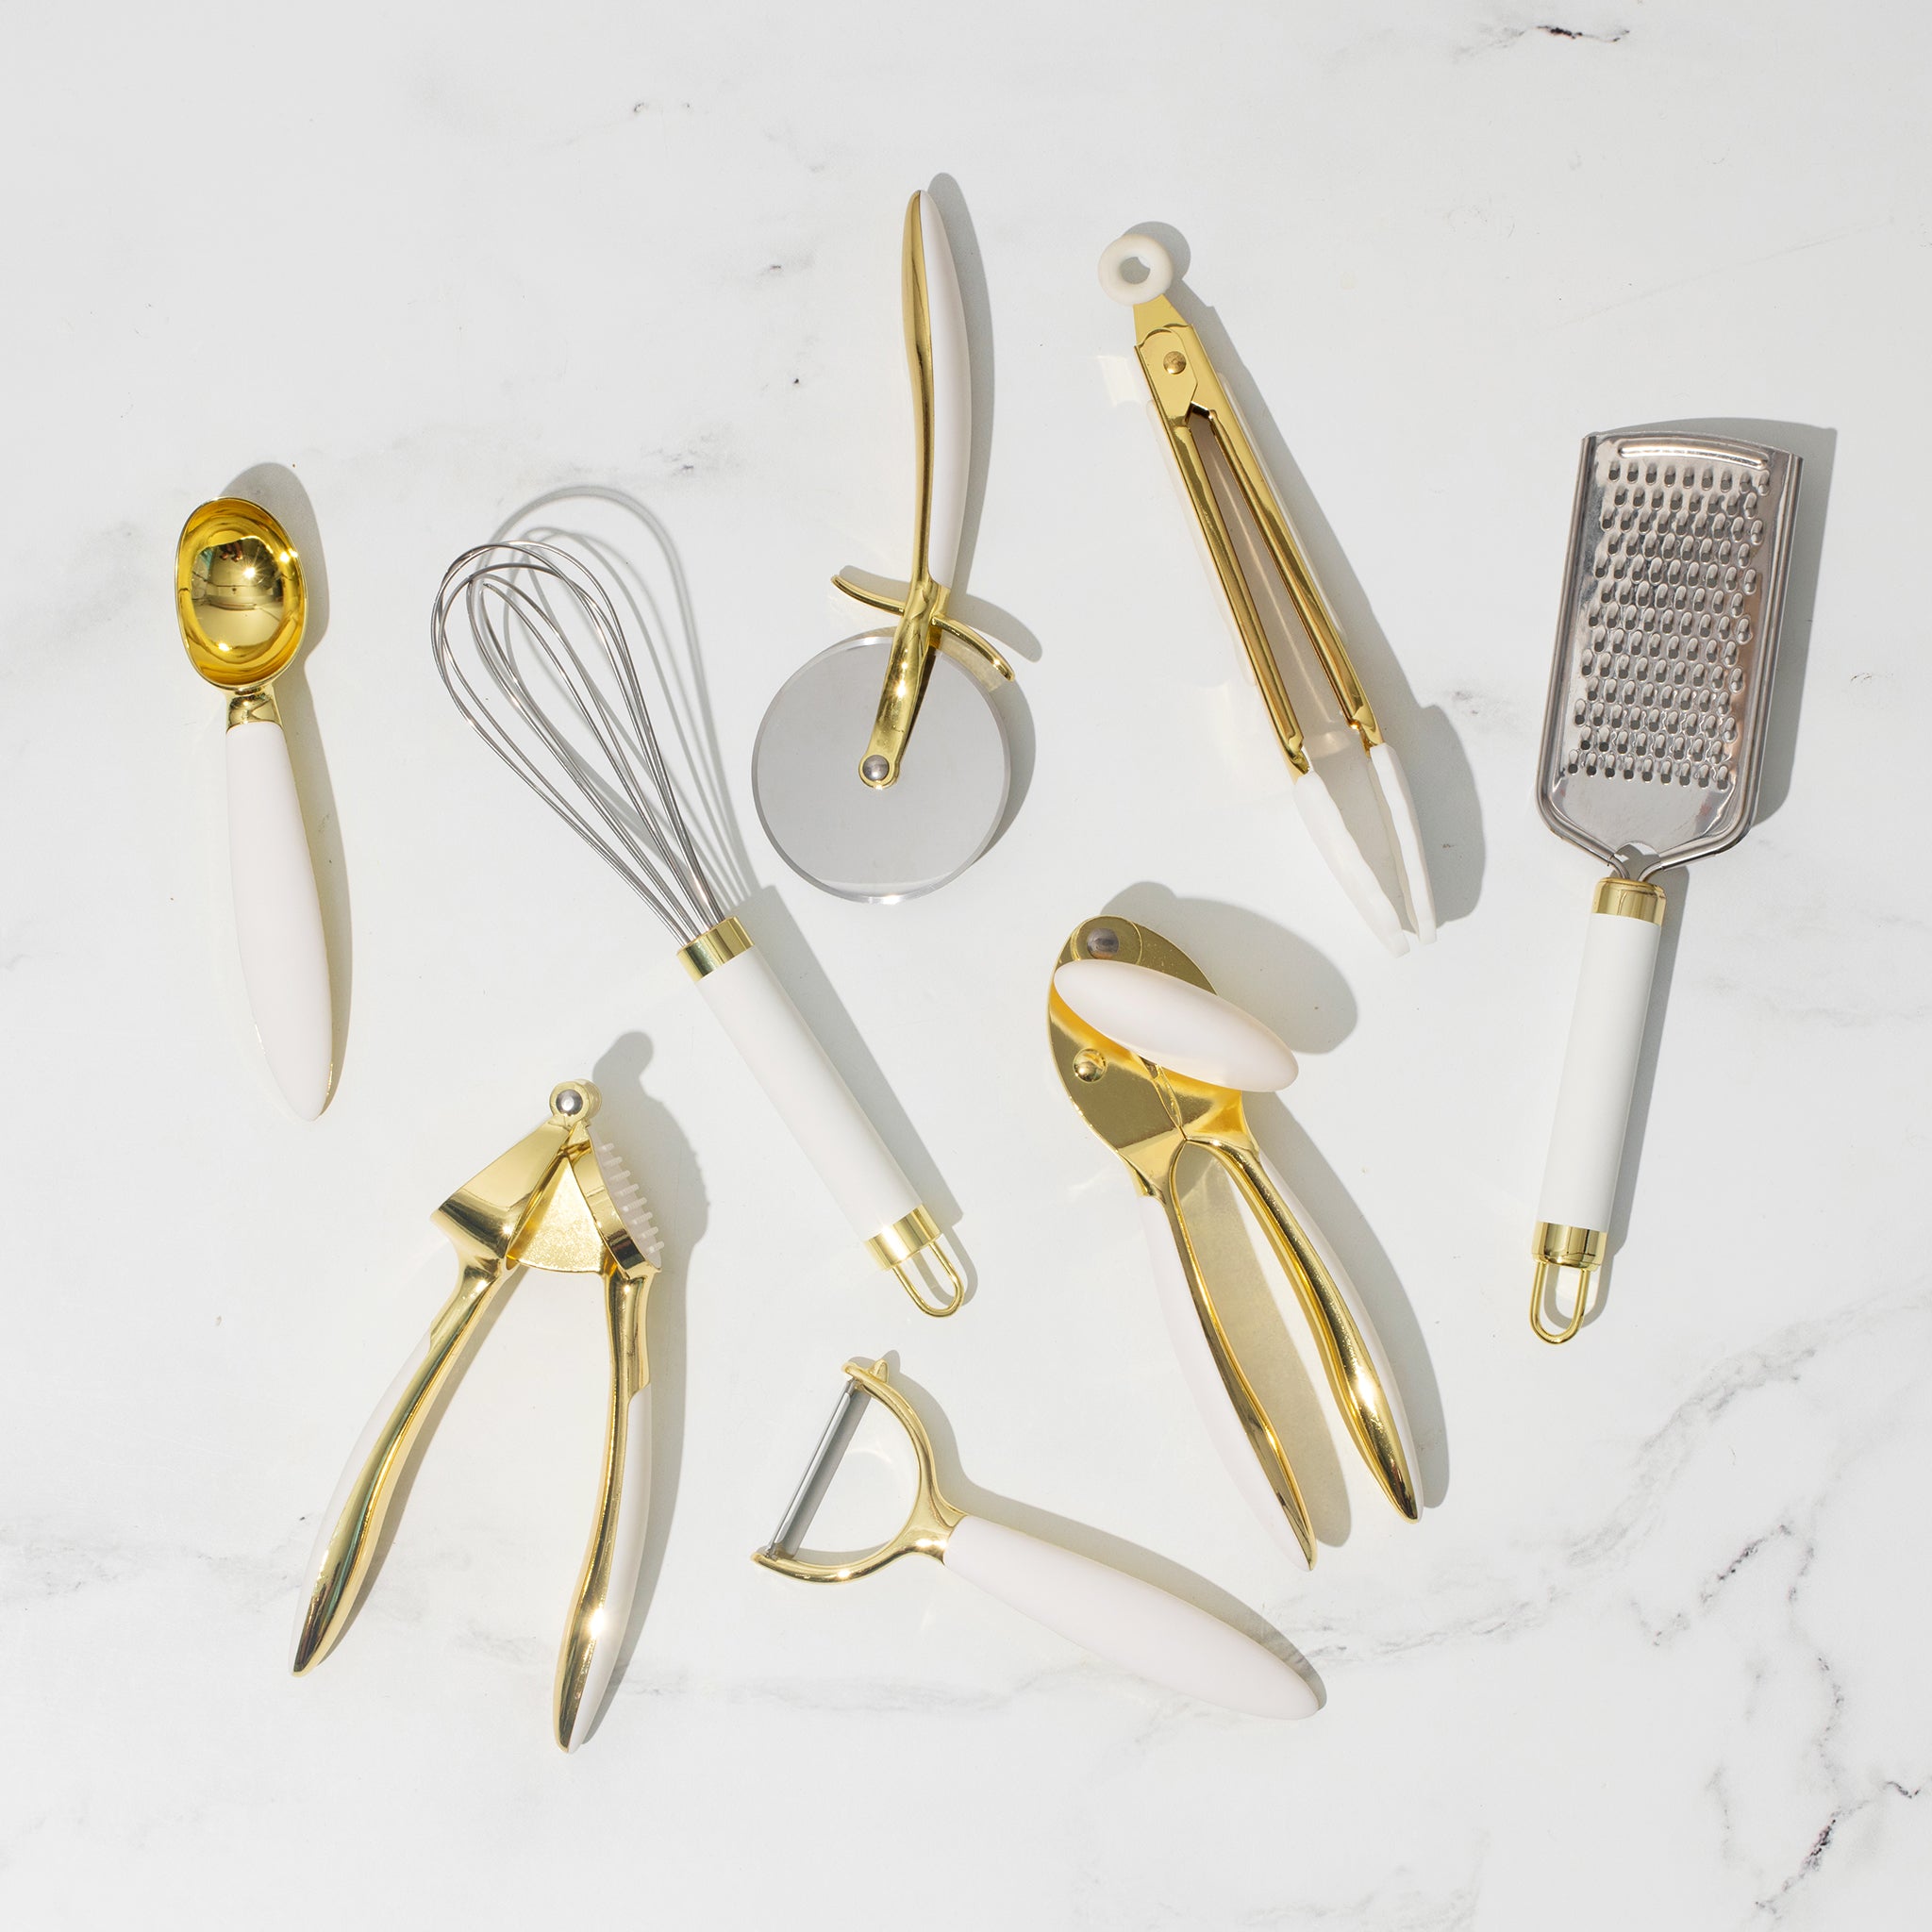 White and Gold Kitchen Tool Set - Styled Settings